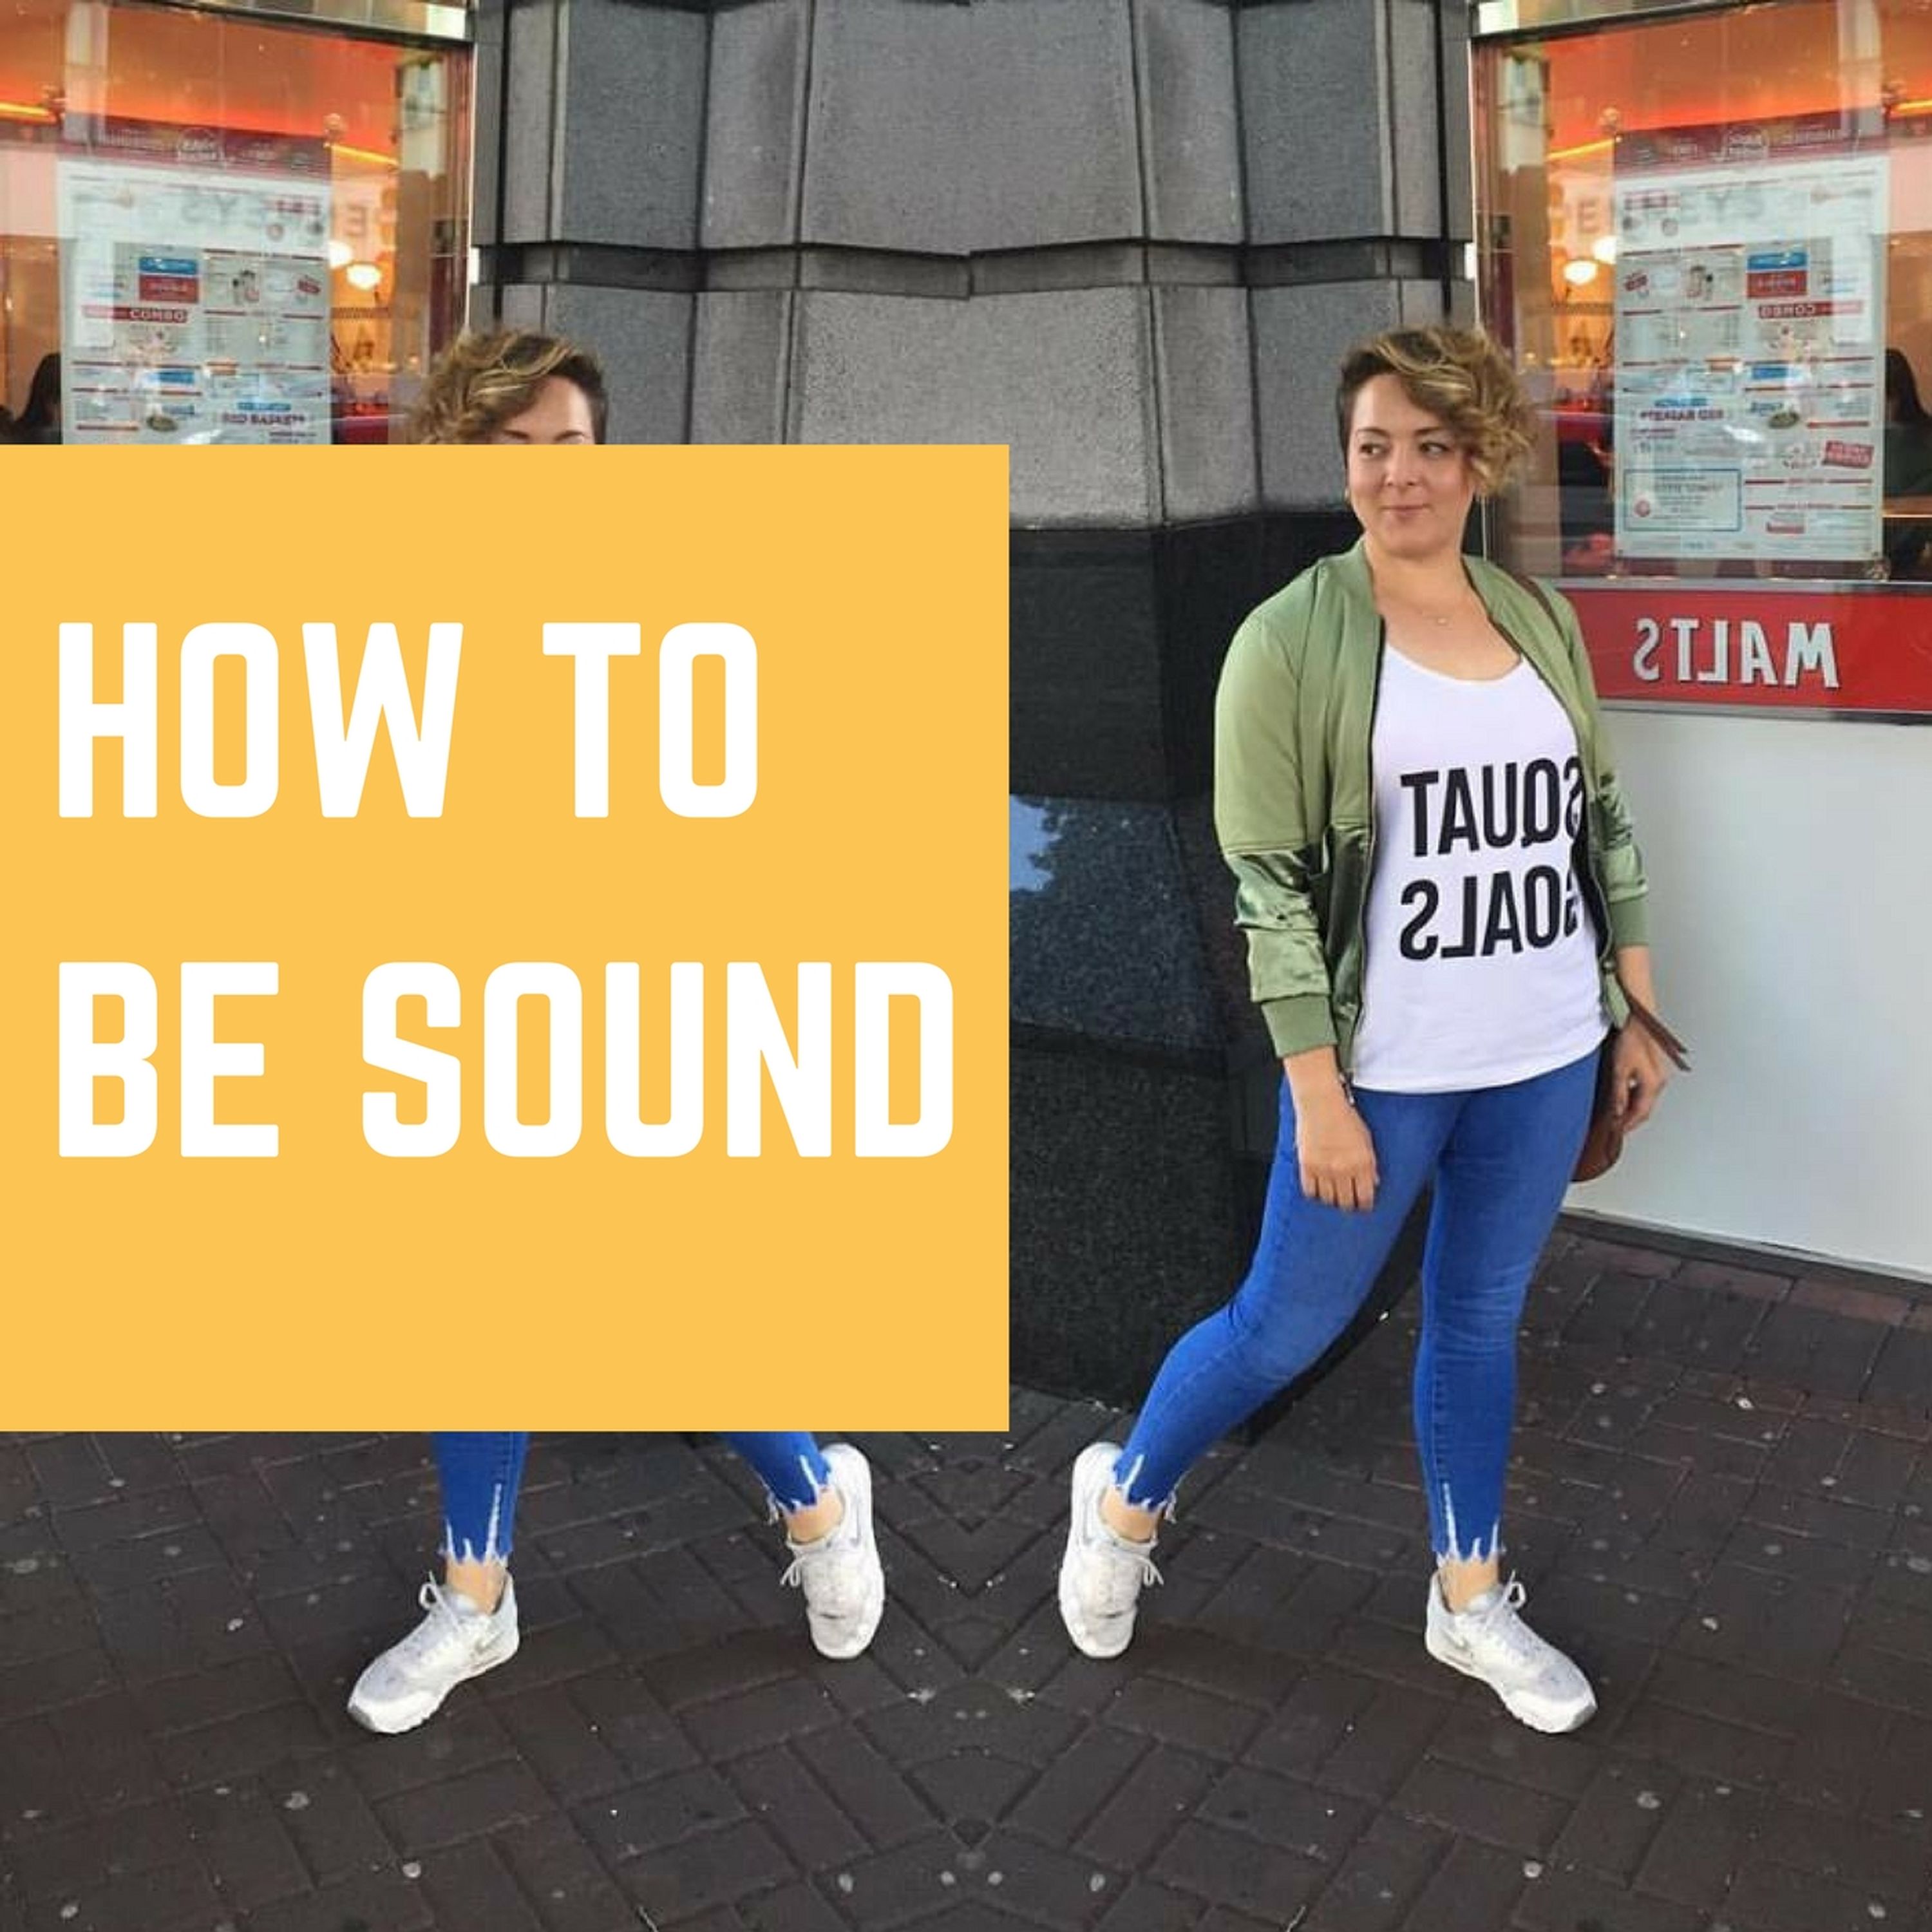 Linda Conway on how to be sound